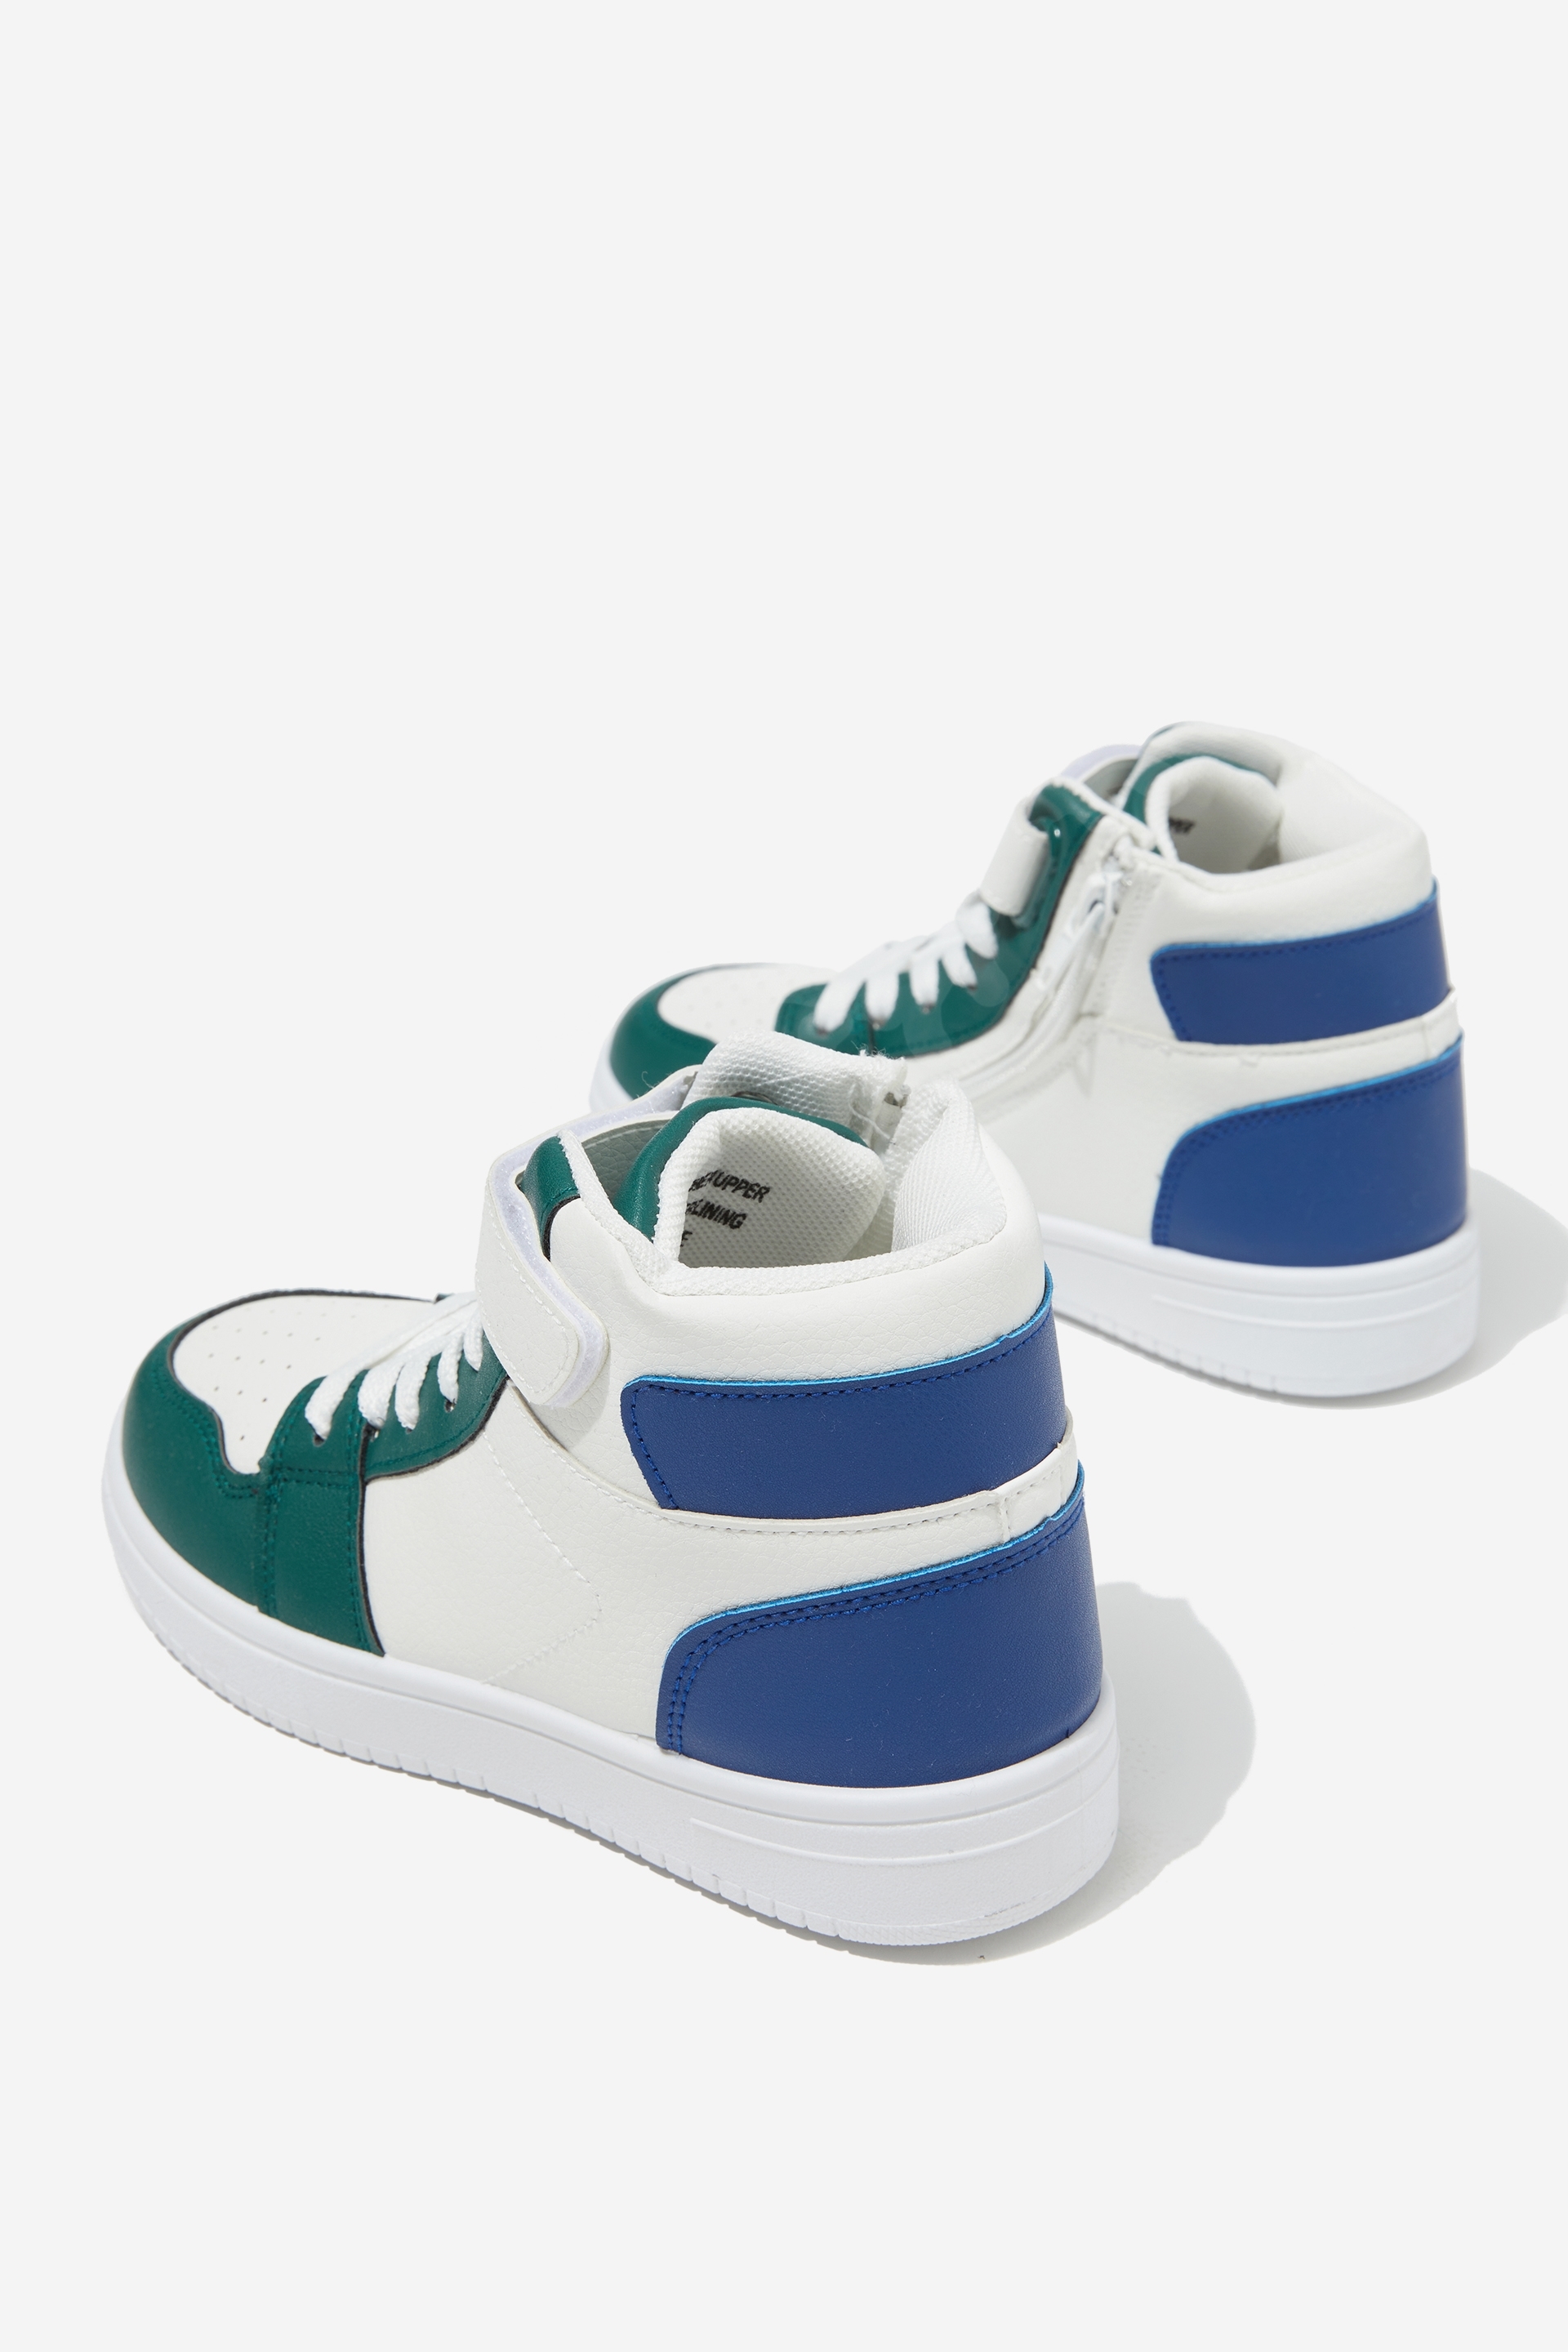 Cotton on Kids - Hunter High Top Trainer - Turtle Green/White